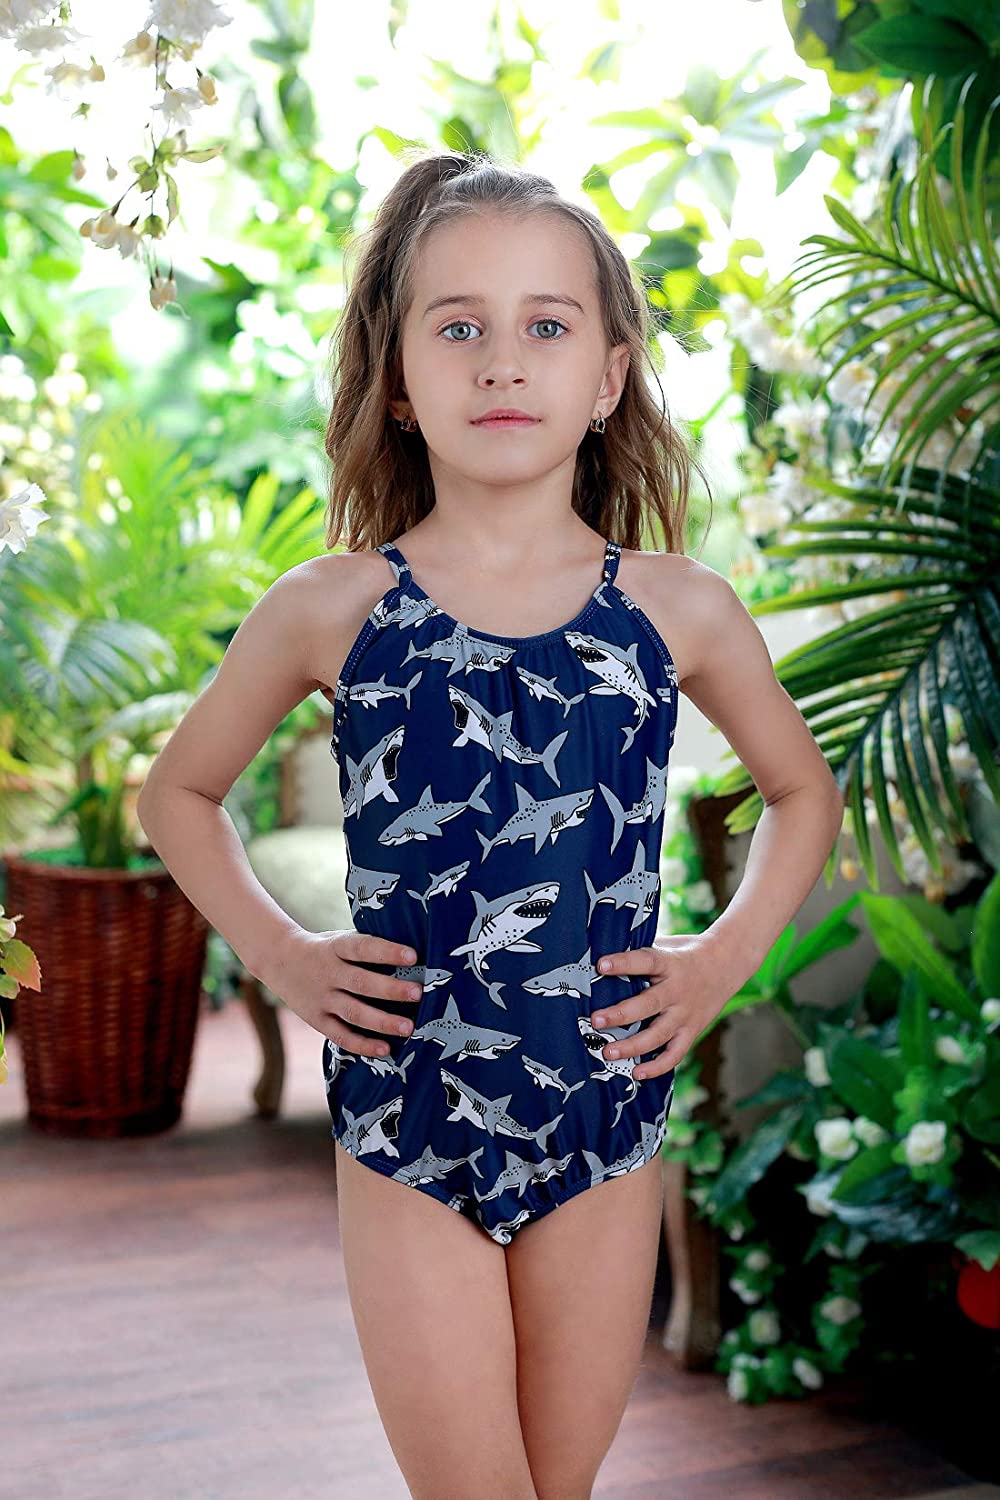 AIDEAONE Girls Swimsuit 3-10 Years One Piece Bathing Suit, Dark Blue ...